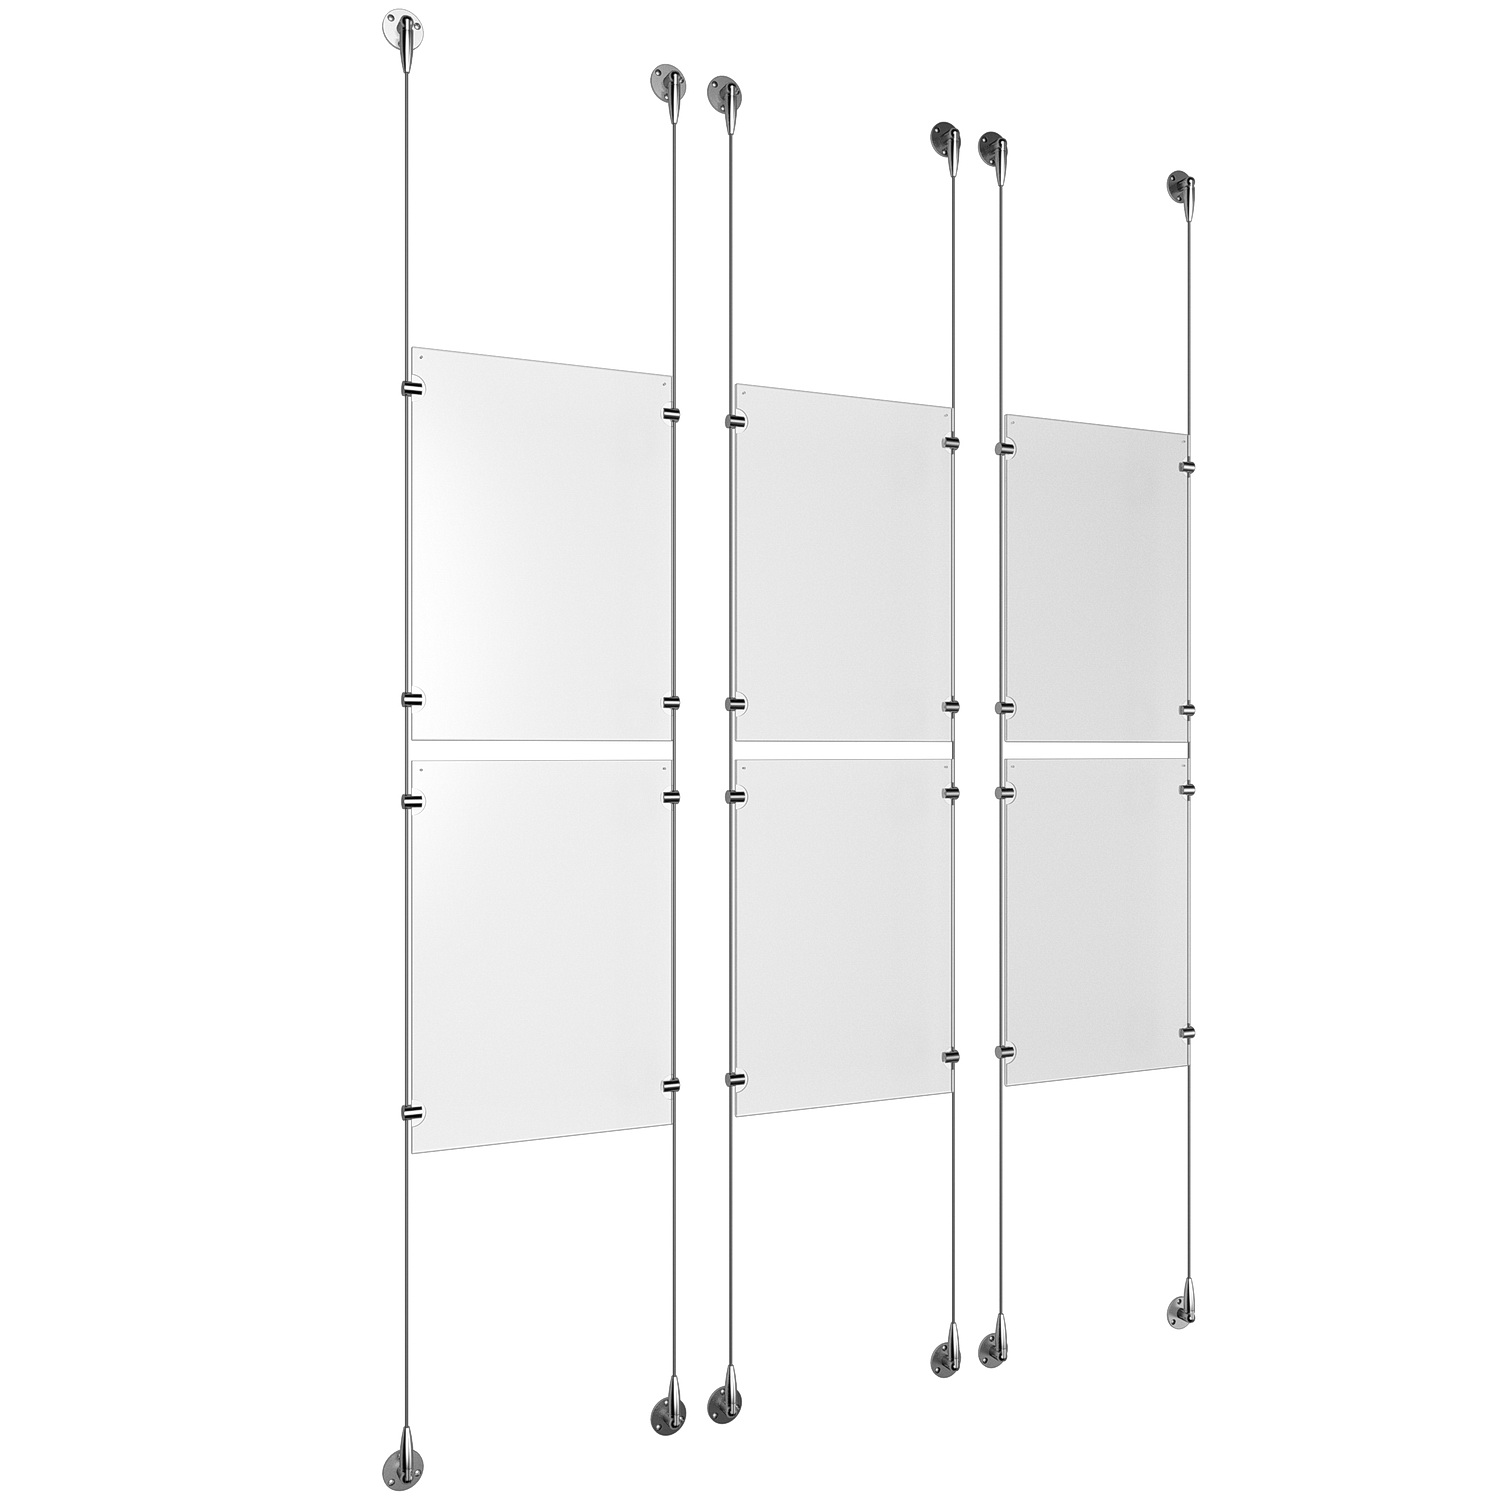 (6) 11'' Width x 17'' Height Clear Acrylic Frame & (6) Stainless Steel Satin Brushed Adjustable Angle Signature 1/8'' Cable Systems with (24) Single-Sided Panel Grippers